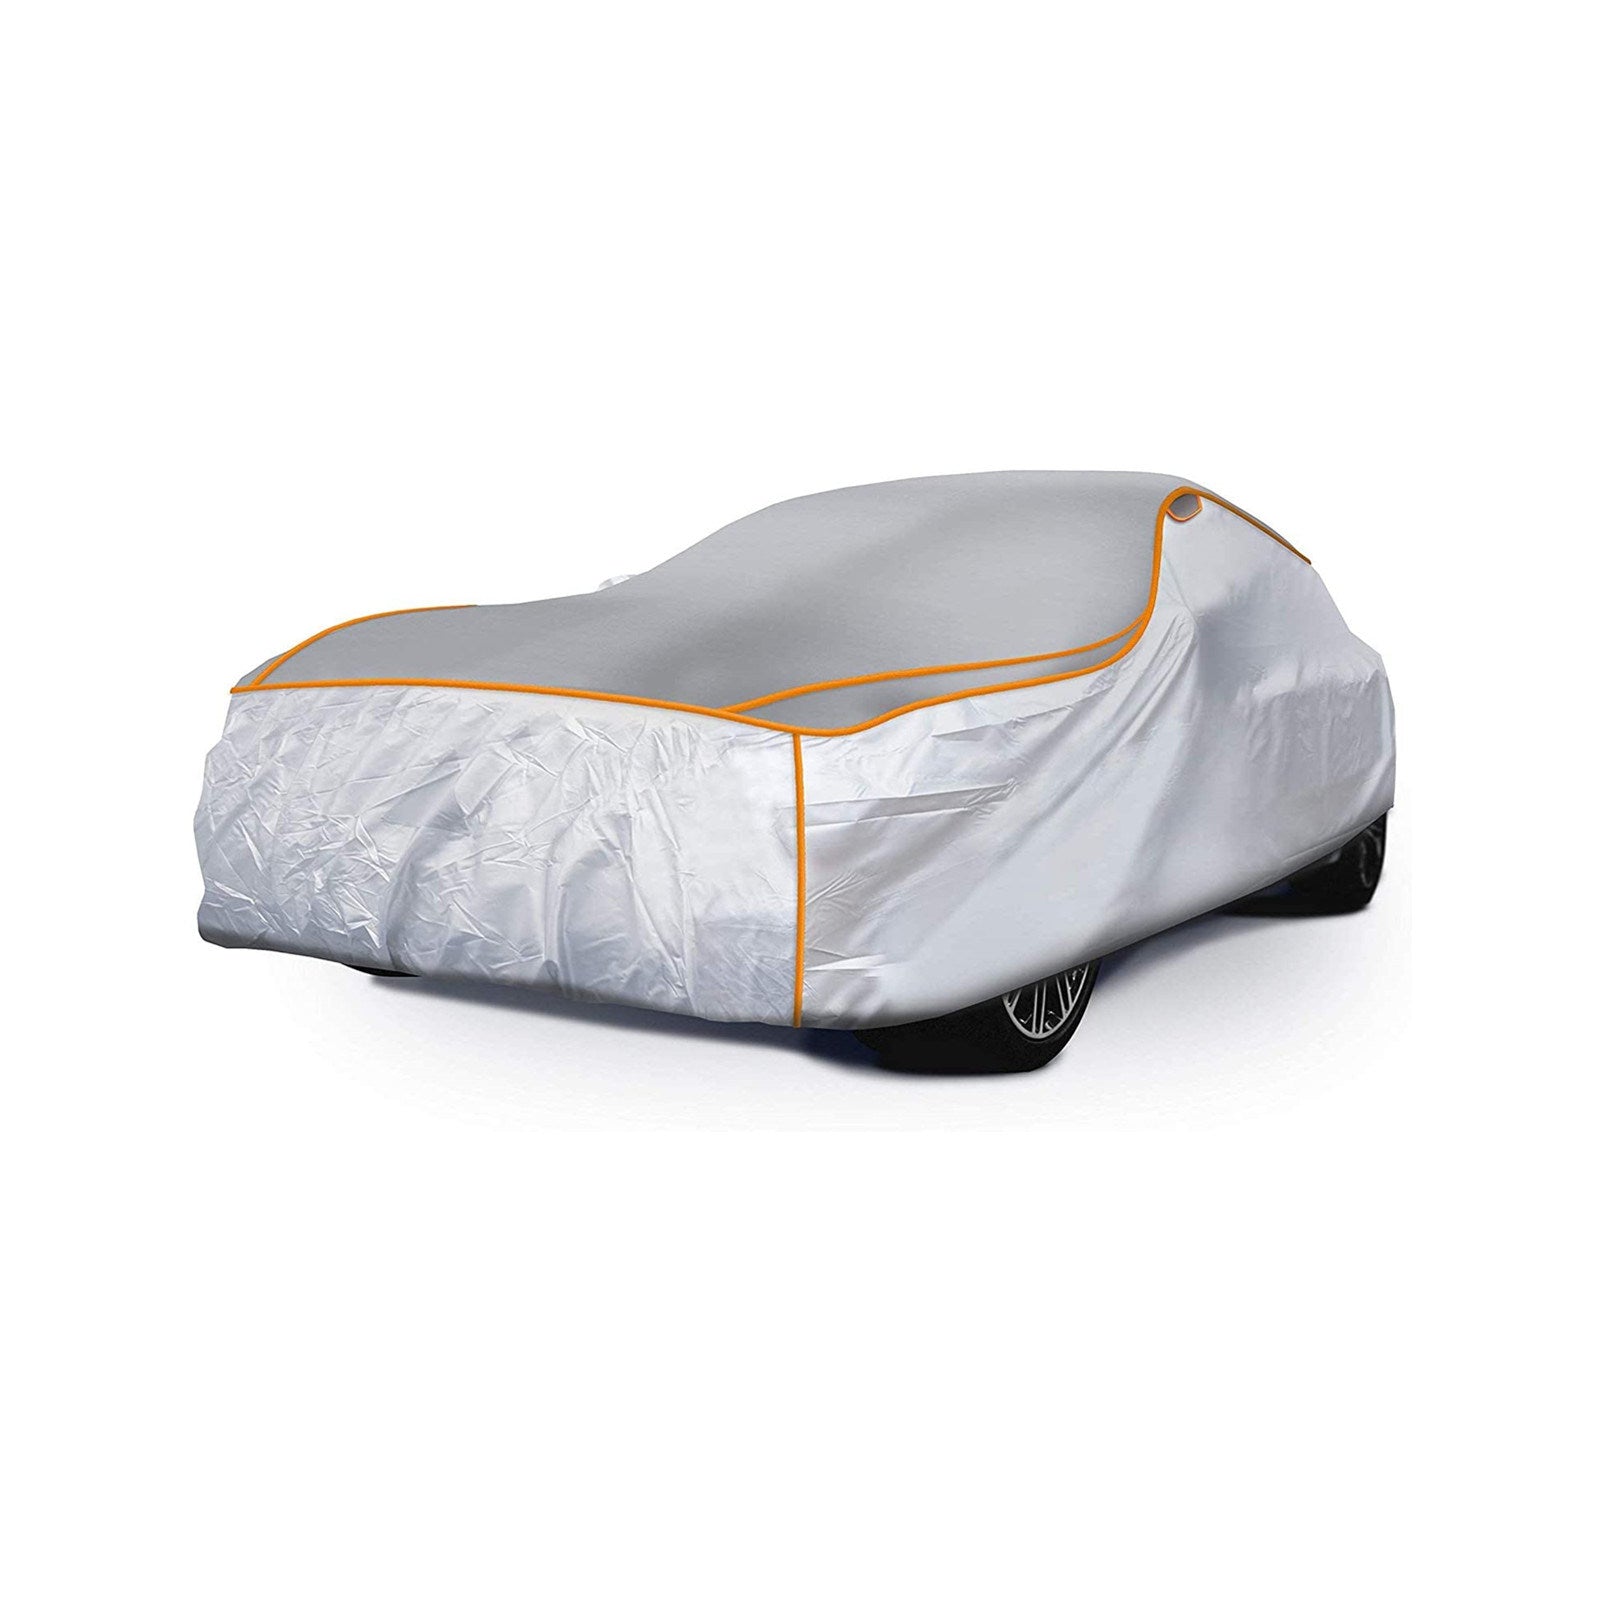 Free shipping 3-layer thickened car full exterior covers, rain, hail and UV protection Will easily fit all Car   YJ